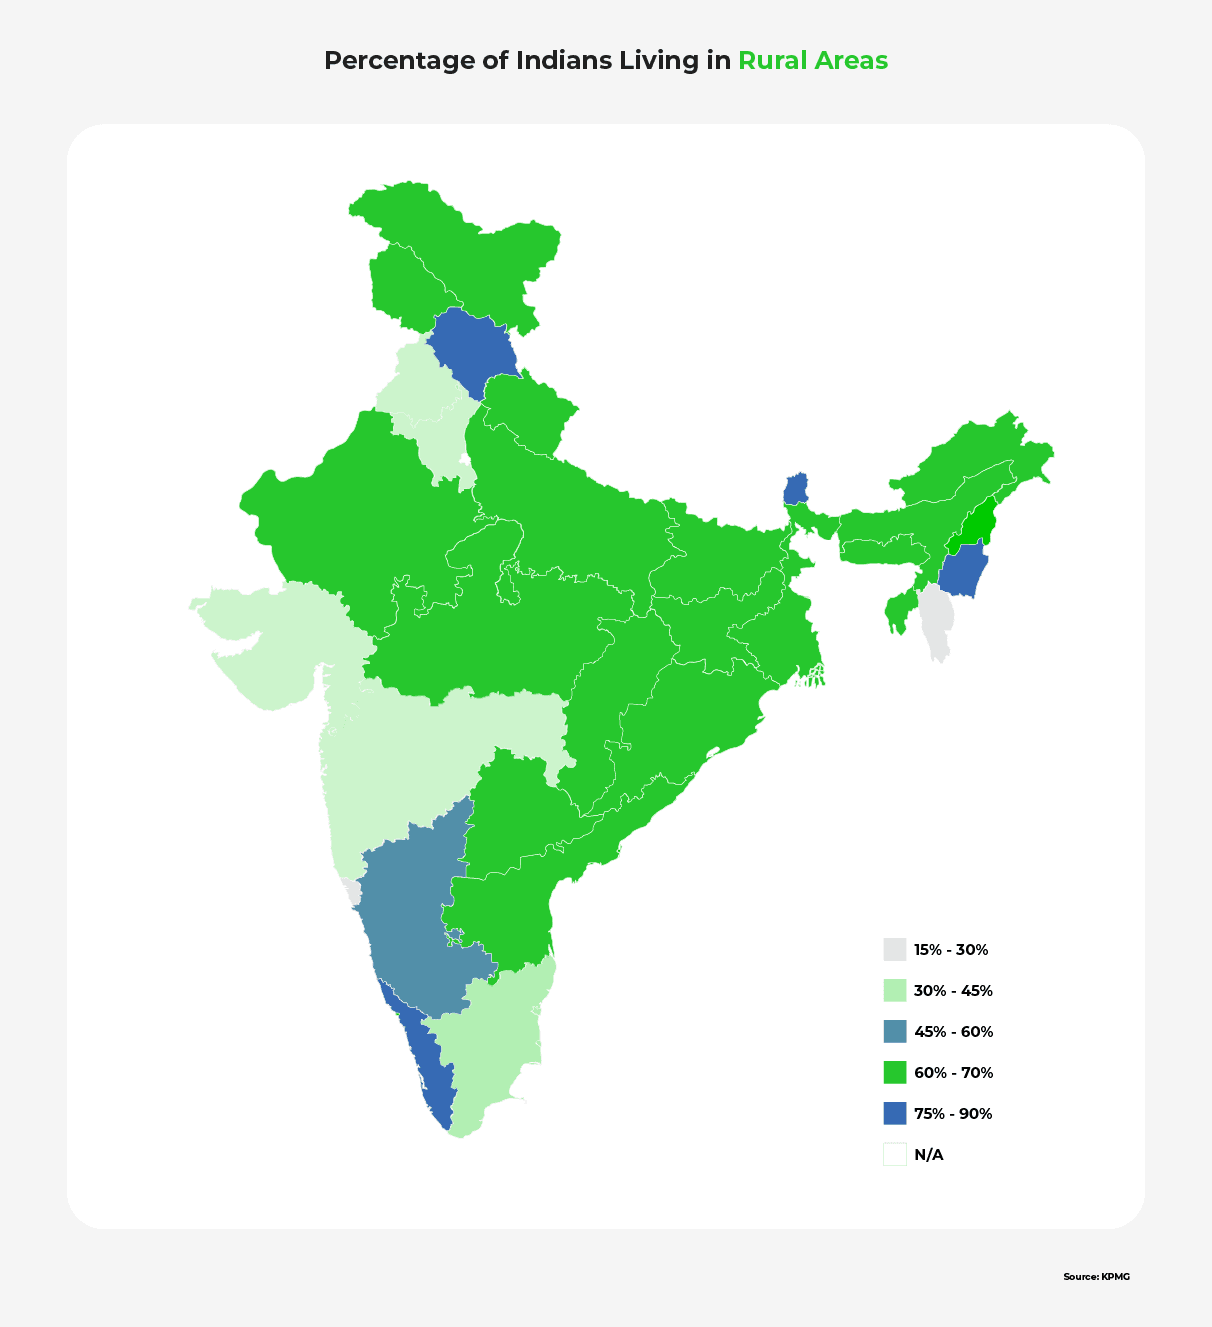 A map of India, color-coded to show the percentage of rural dwellers in each region